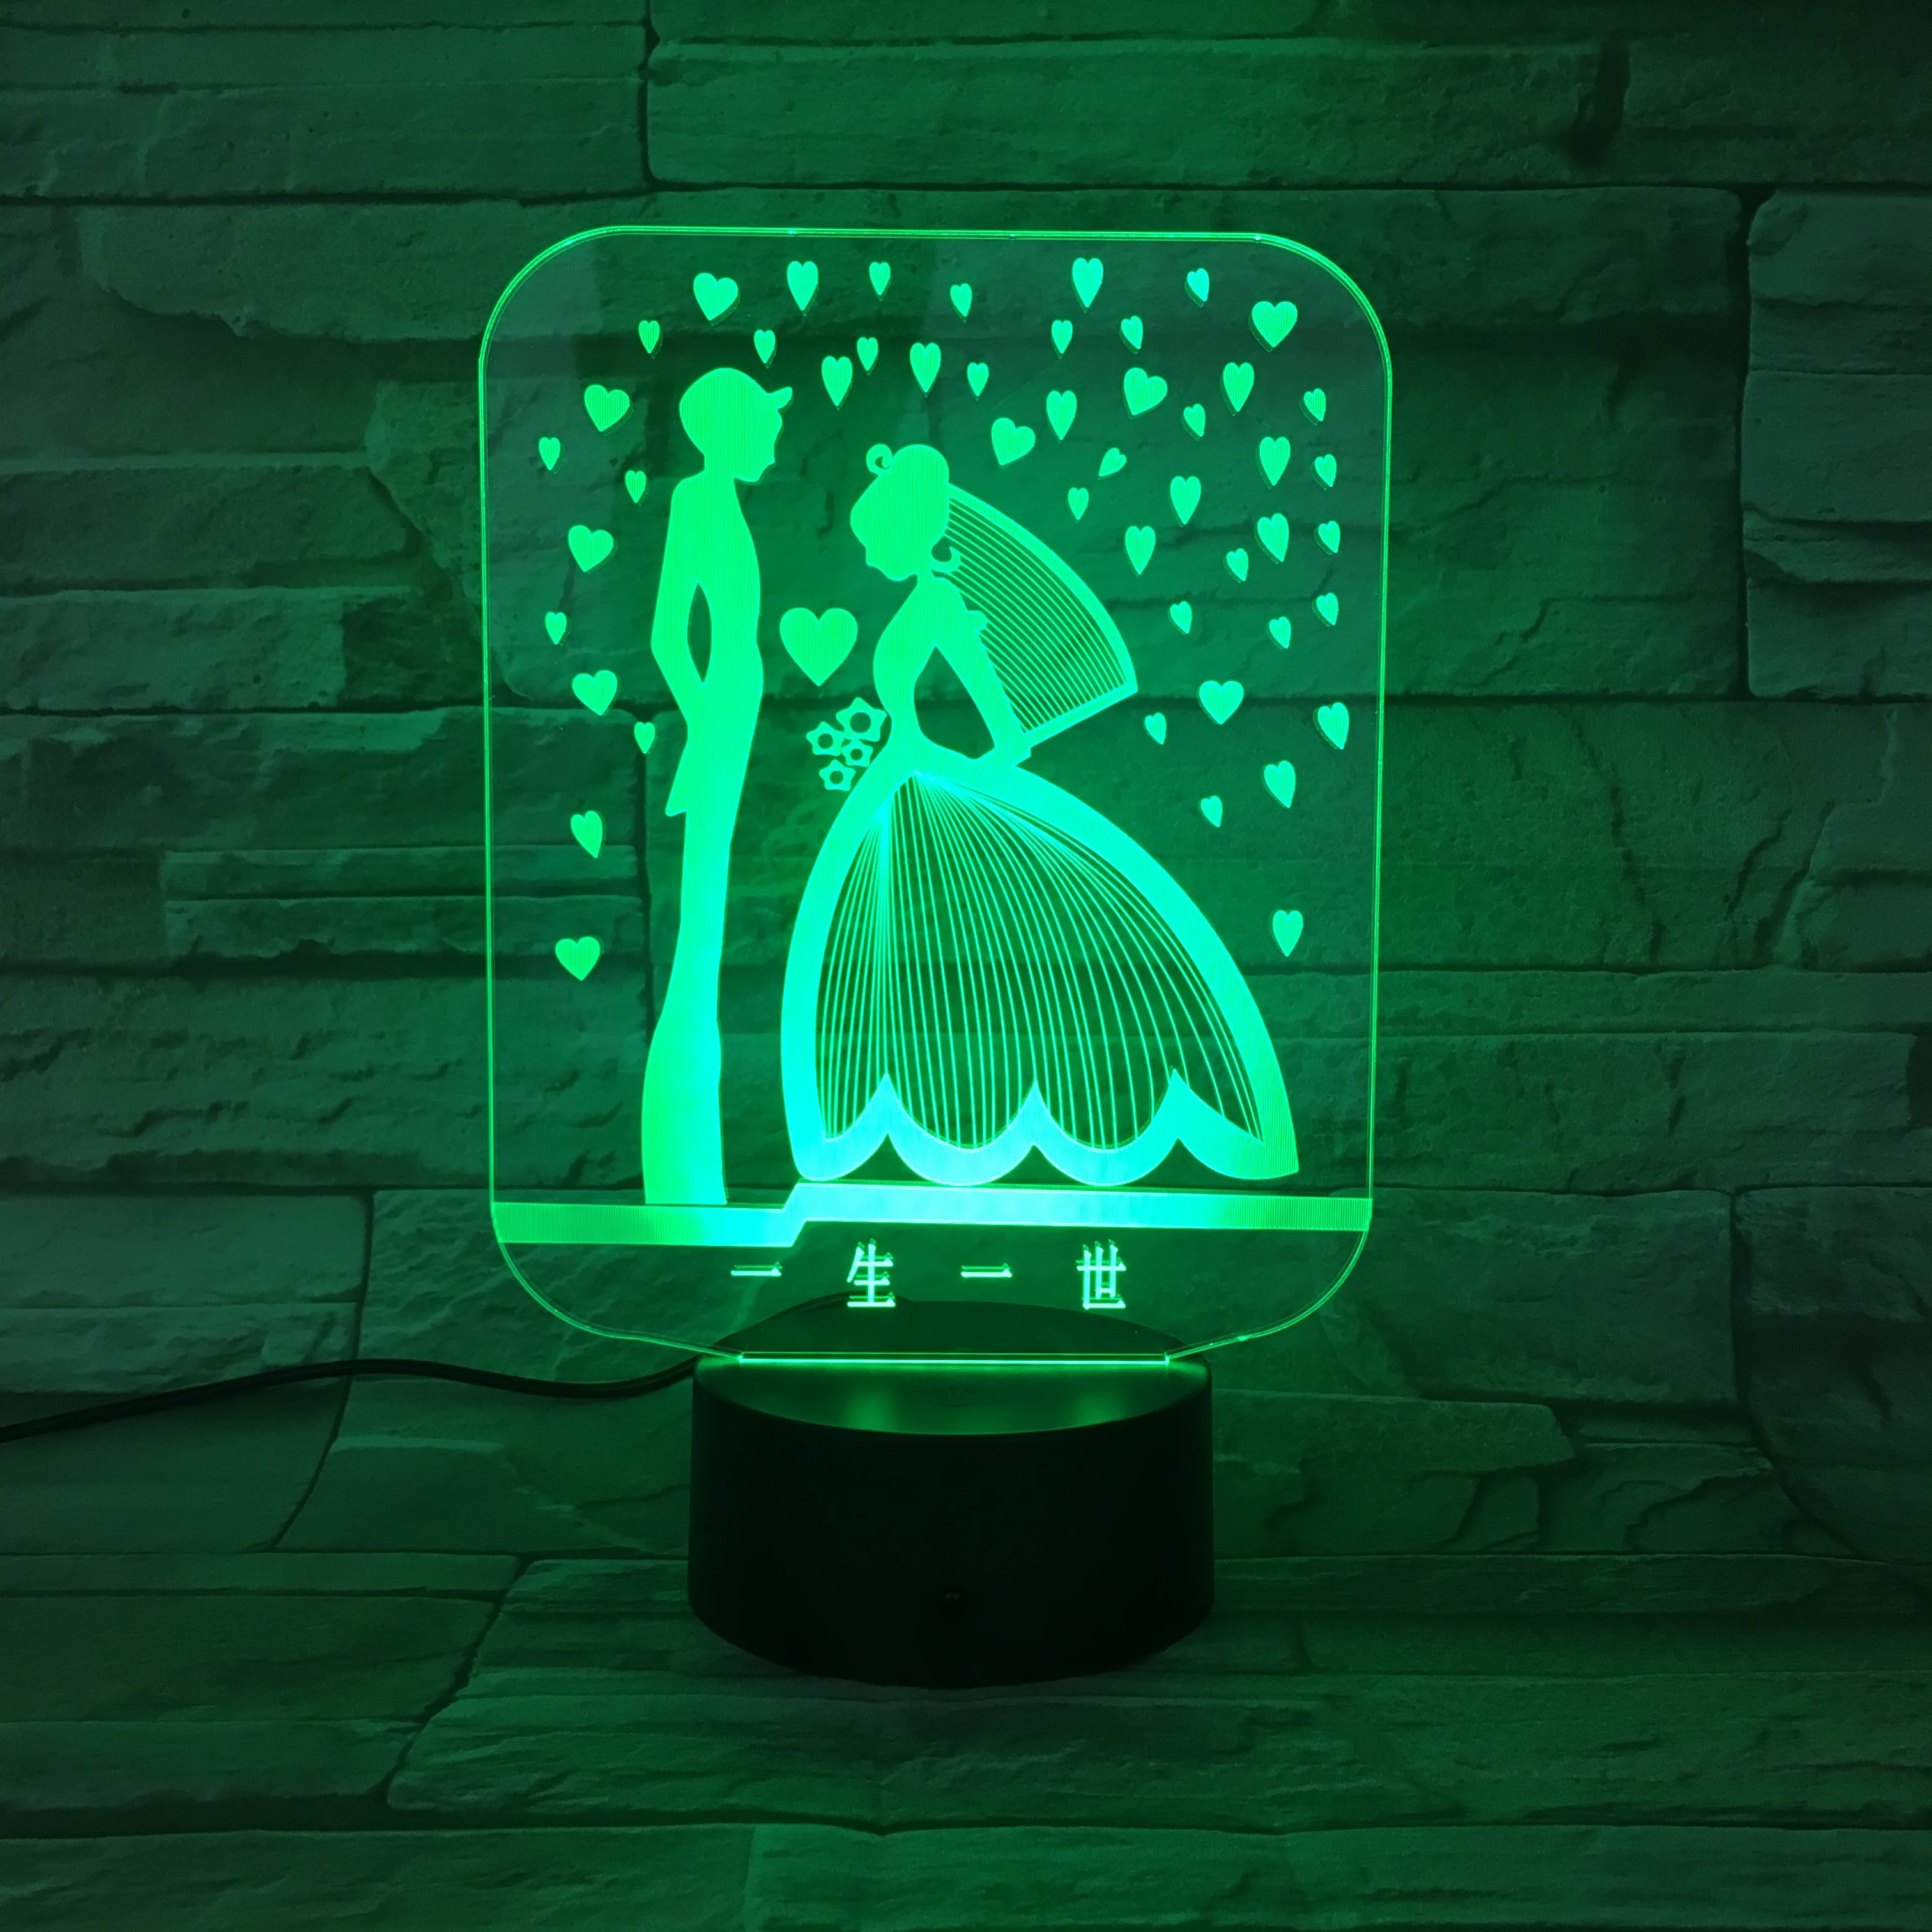 

Creative 3D Visual Lover Marry Led Night Light 7 Color Home Table Party Bar Decor Led Lamp Boys girls Kids Favor Best Gifts 764